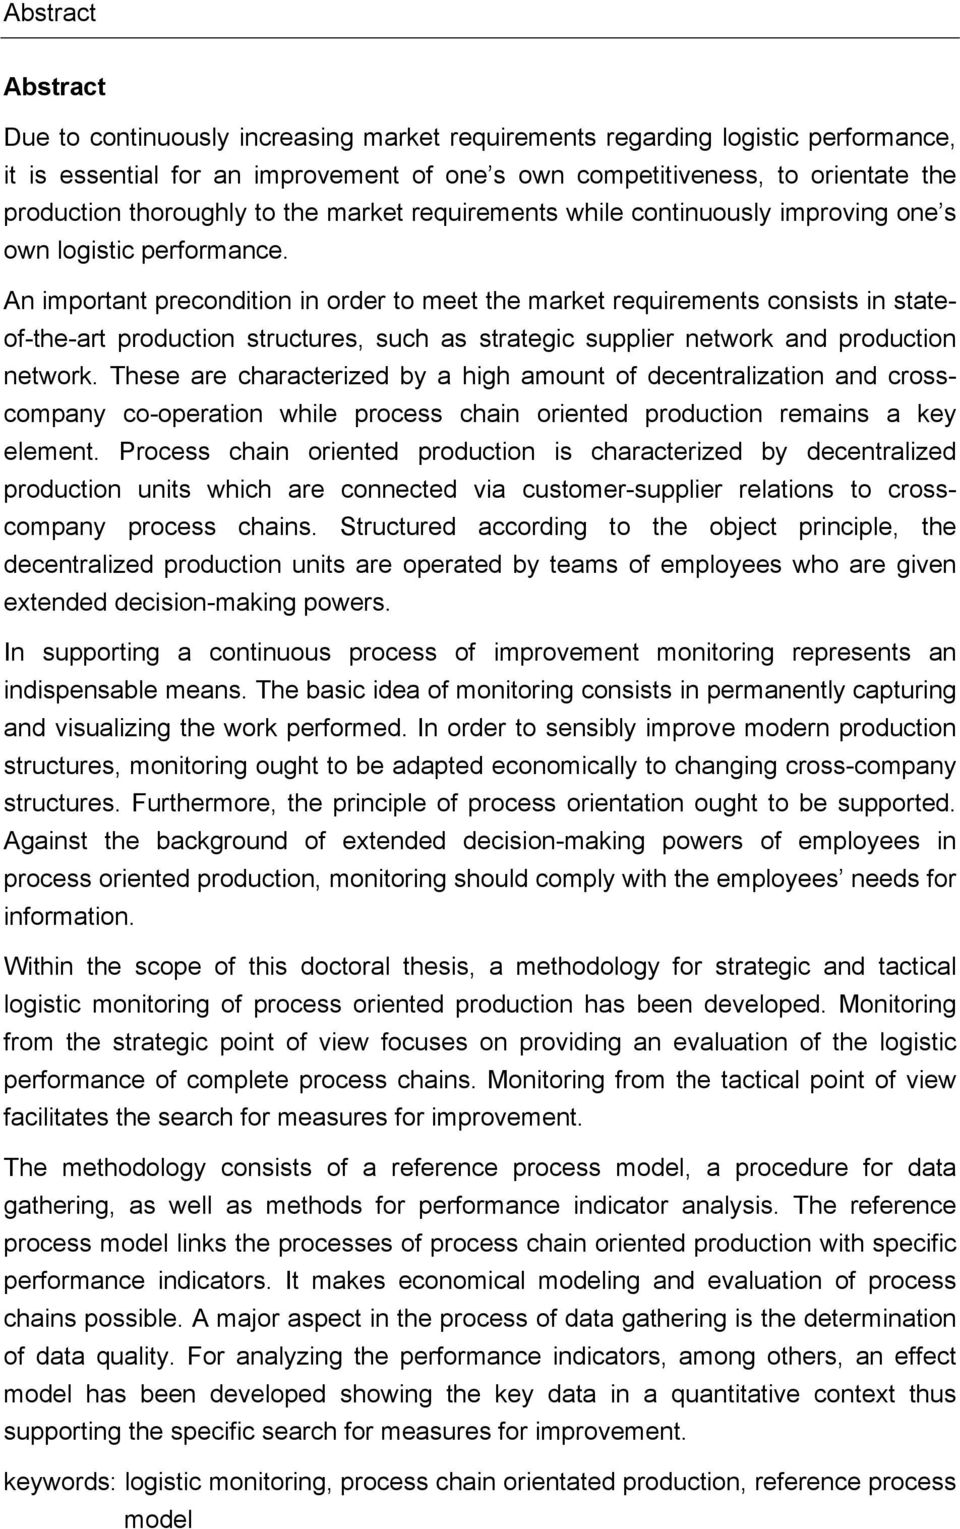 An important precondition in order to meet the market requirements consists in stateof-the-art production structures, such as strategic supplier network and production network.